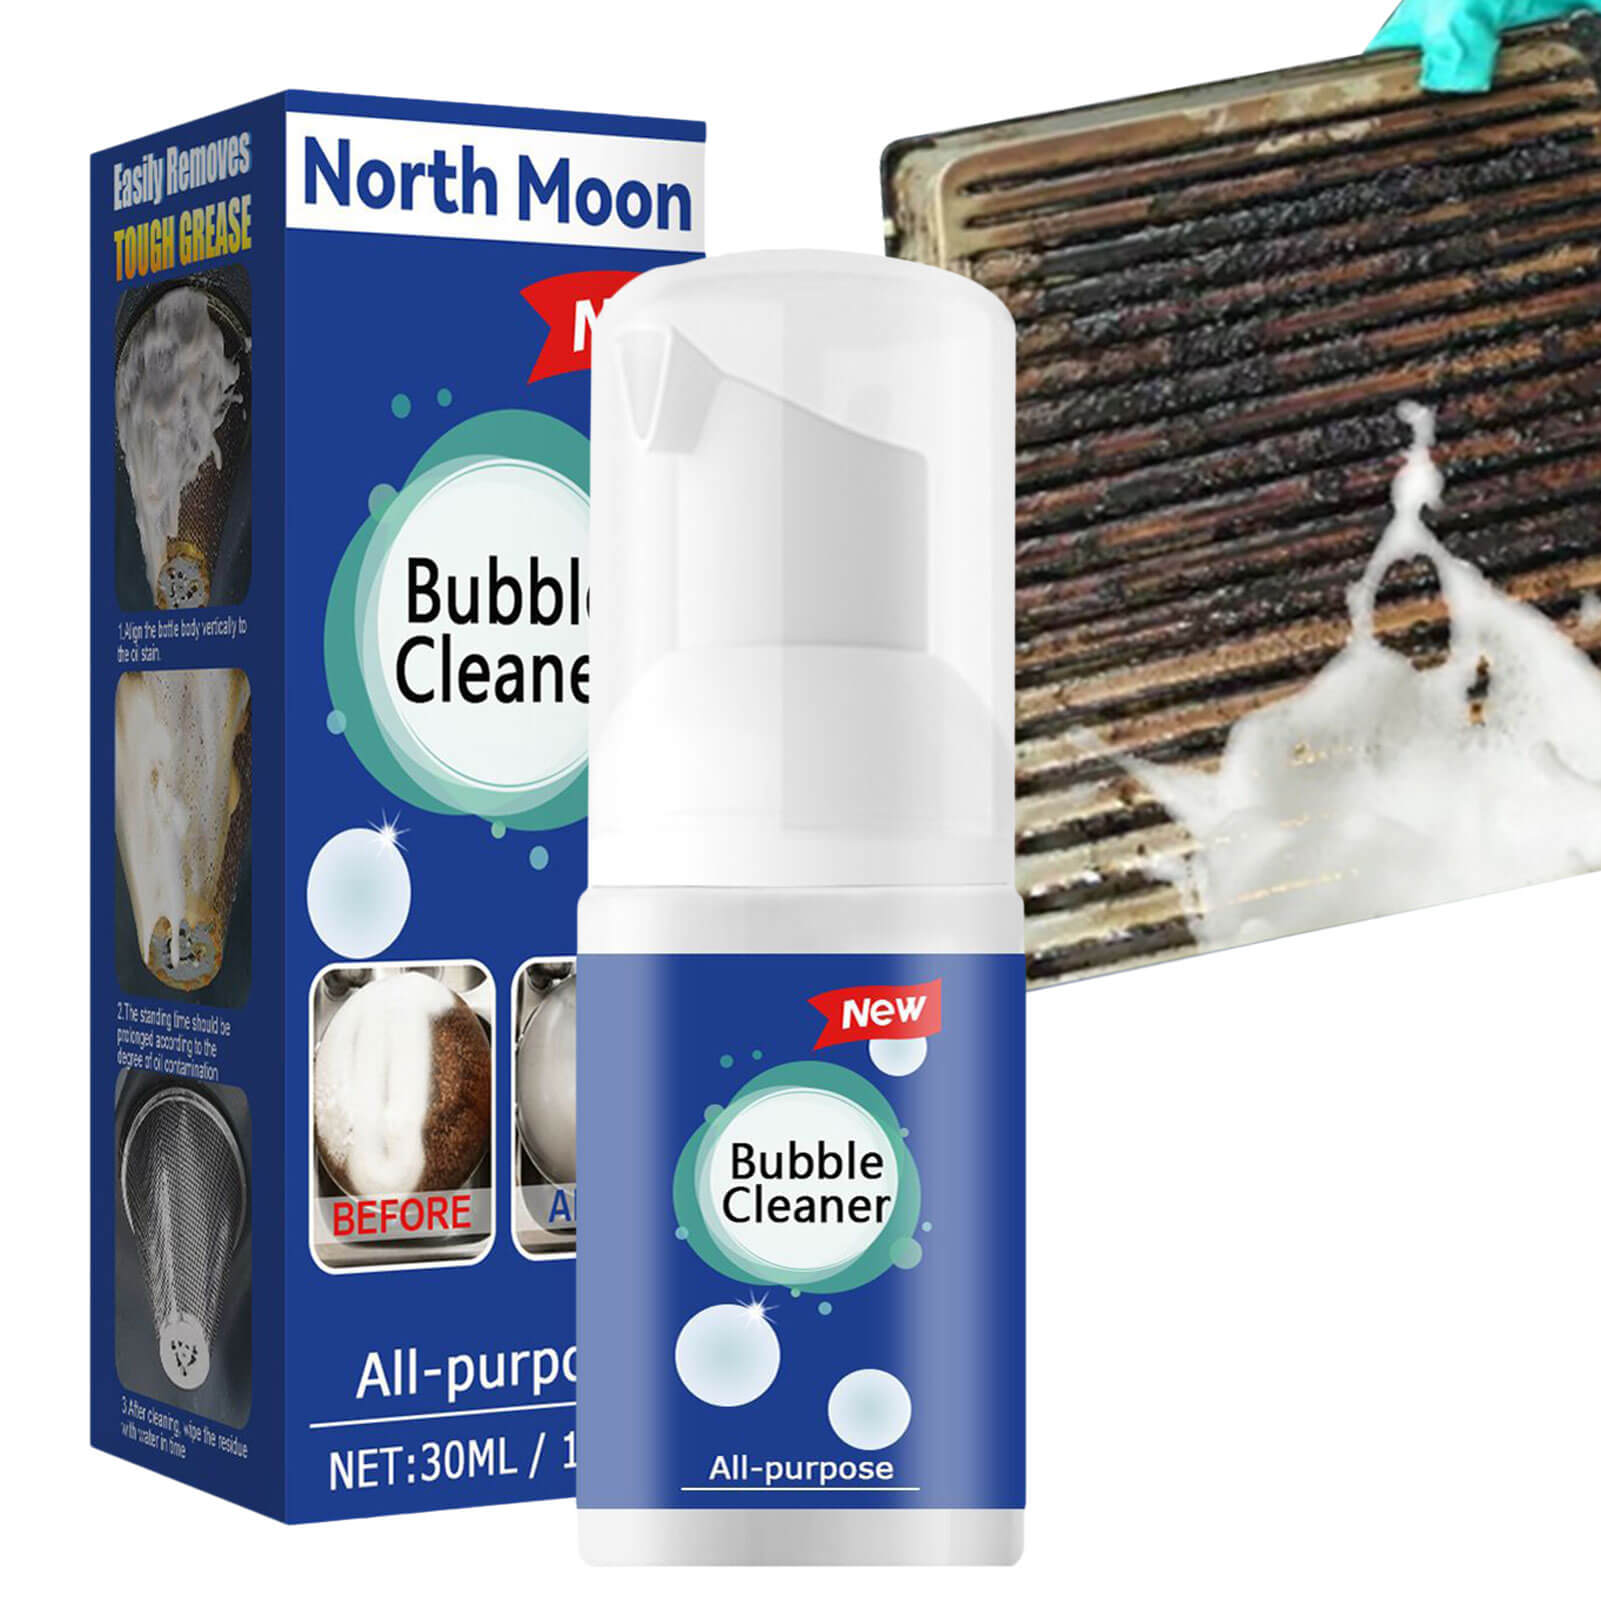  Bubble Cleaner Foam Spray, North Moon Bubble Cleaner Foam, All  Purpose Rinse Cleaning Foam, Bubble Cleaner North Moon (30ML, 2 pcs) :  Health & Household